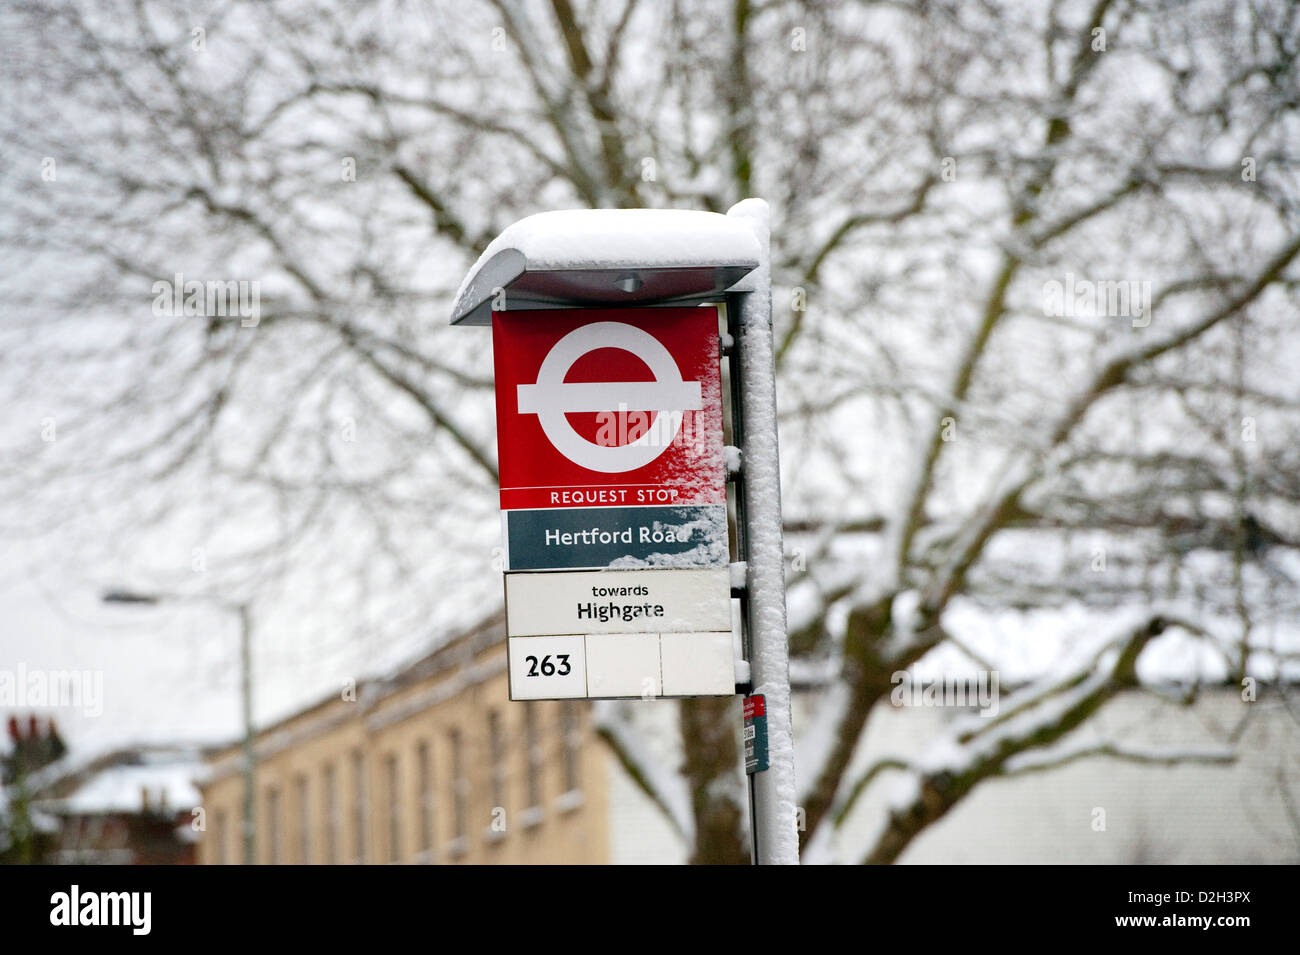 Bus stop sign covered in snow 263 bus stop Stock Photo